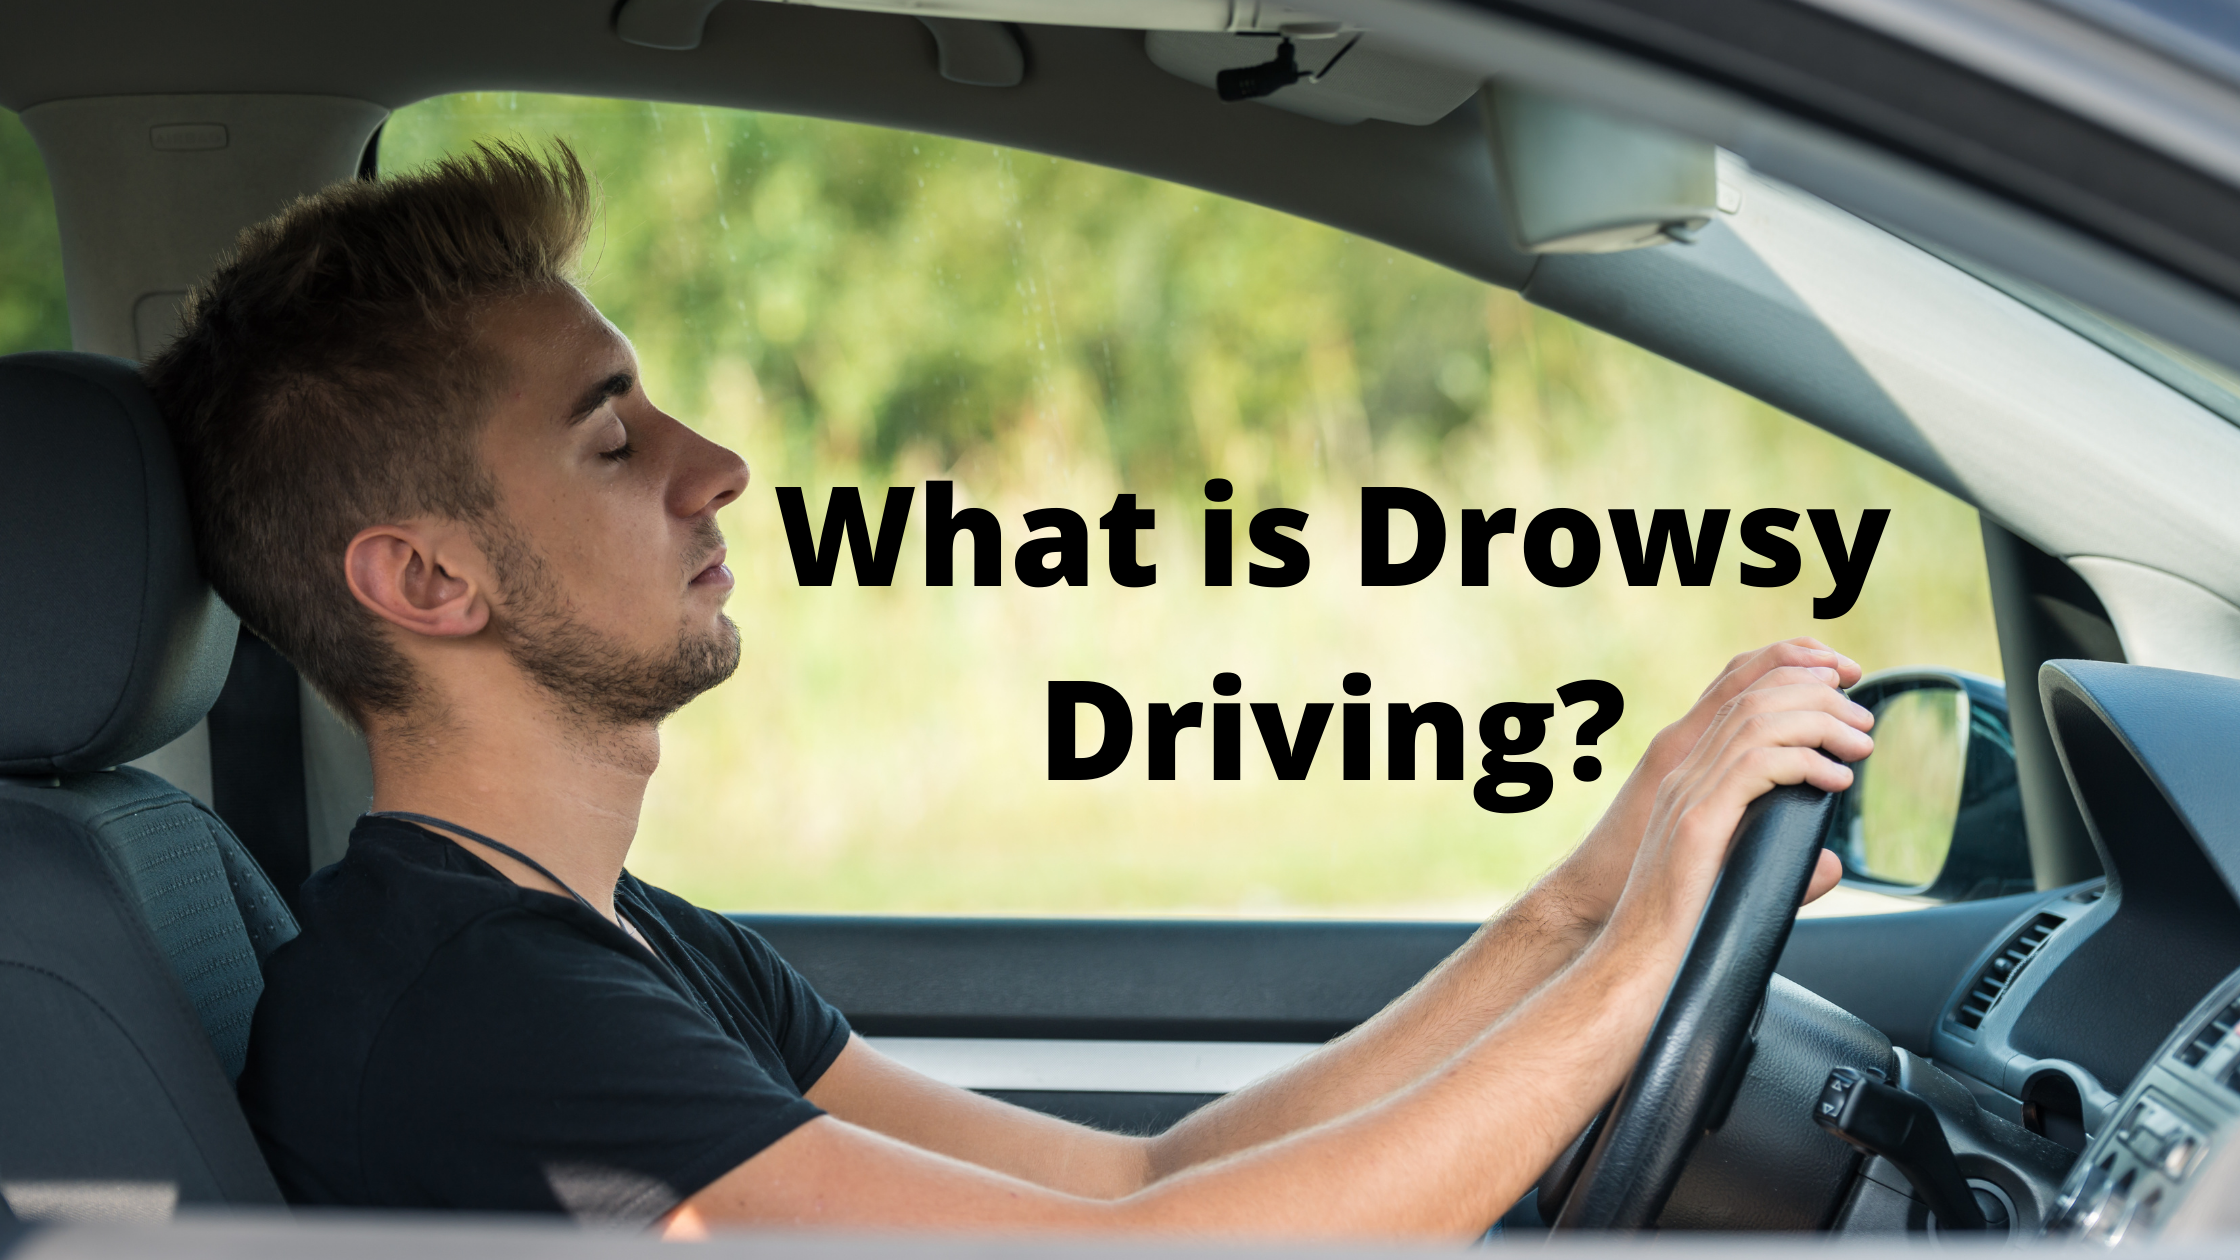 What is Drowsy Driving?